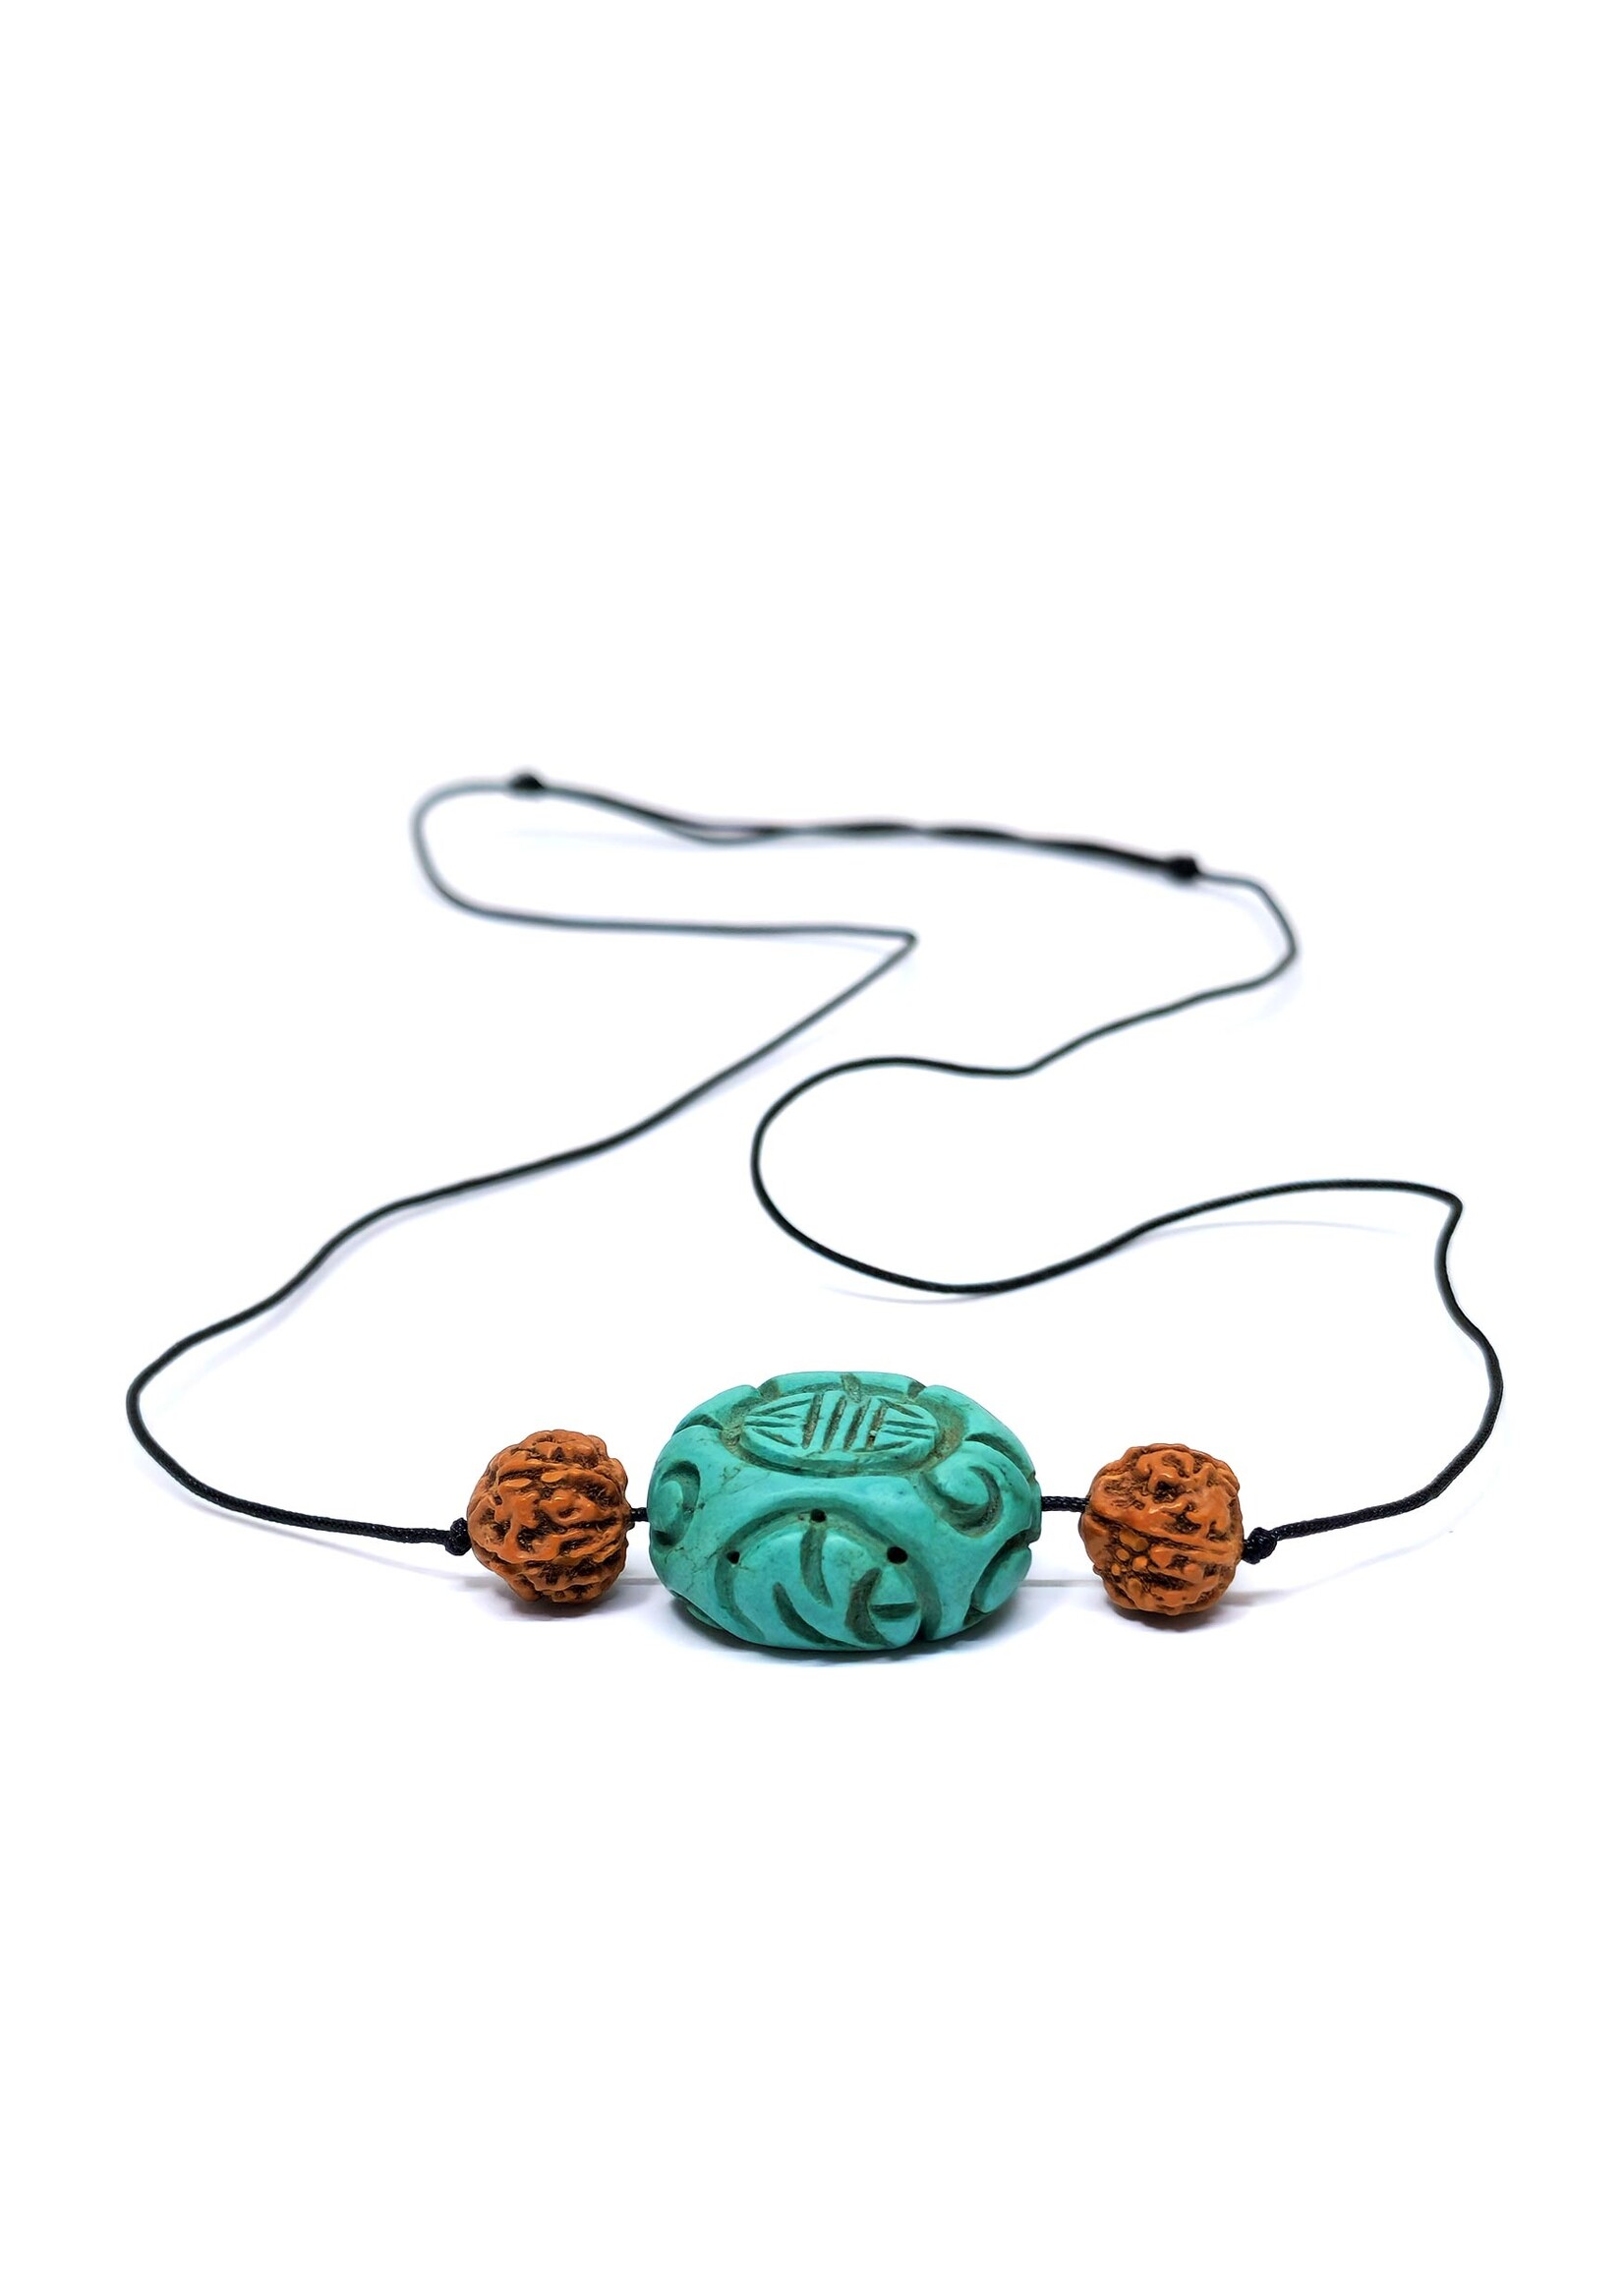 Necklace with turquoise color stone pendant and rudraksha beads